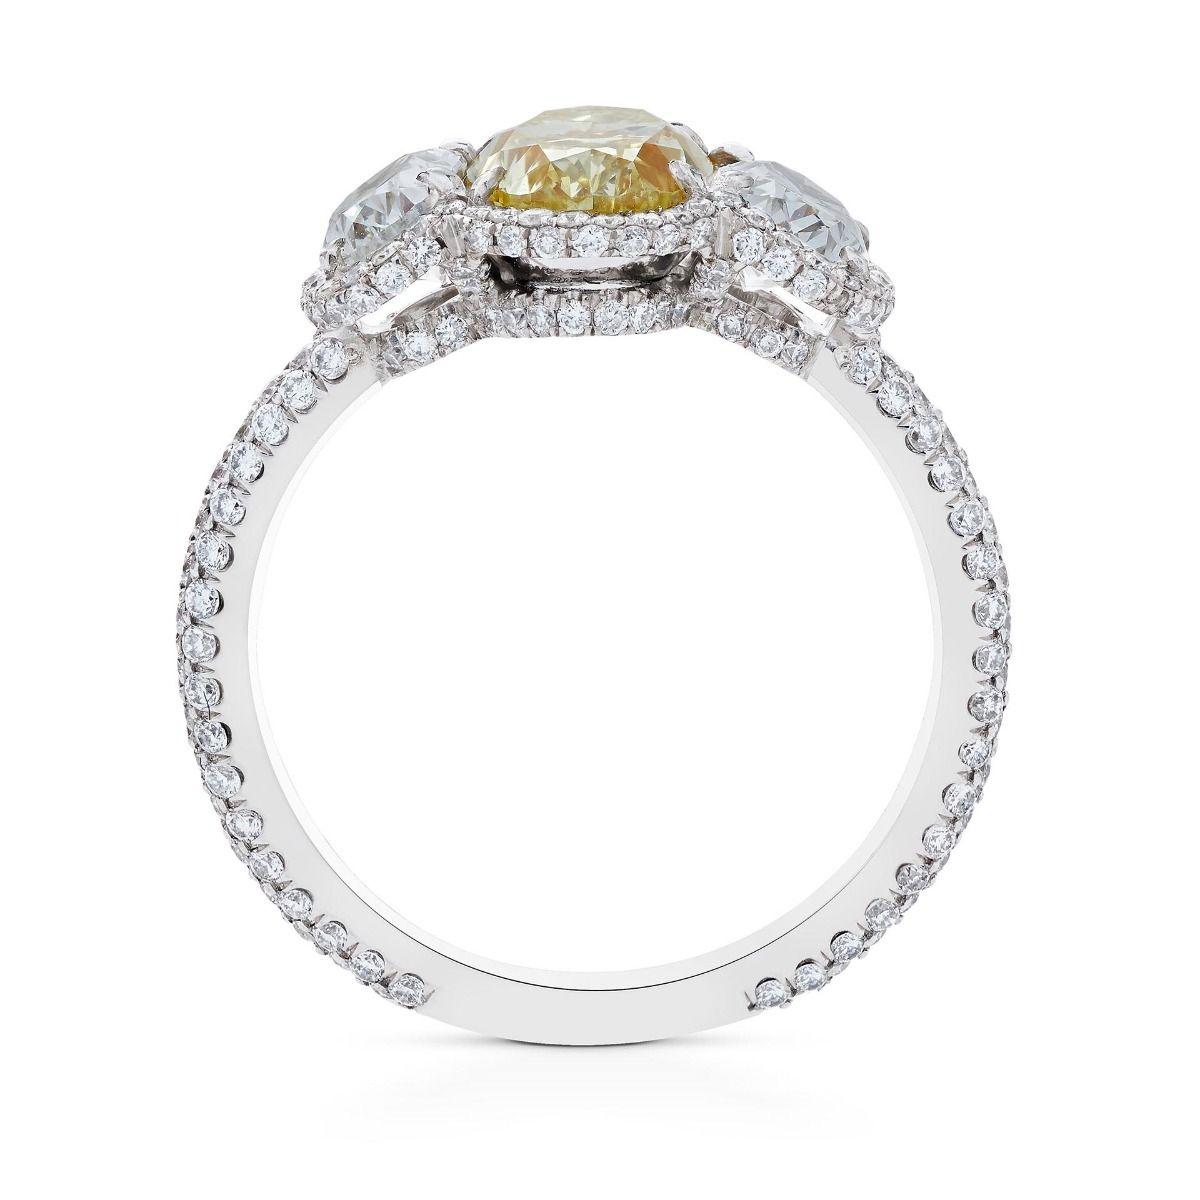 This three stone diamond ring features a central oval cut Natural Fancy Yellow diamond of 1.73 cts., flanked by two white oval cut diamonds of 1.05 cts. This notably contrasting trilogy is further accented by a diamond halo outline composed of 225